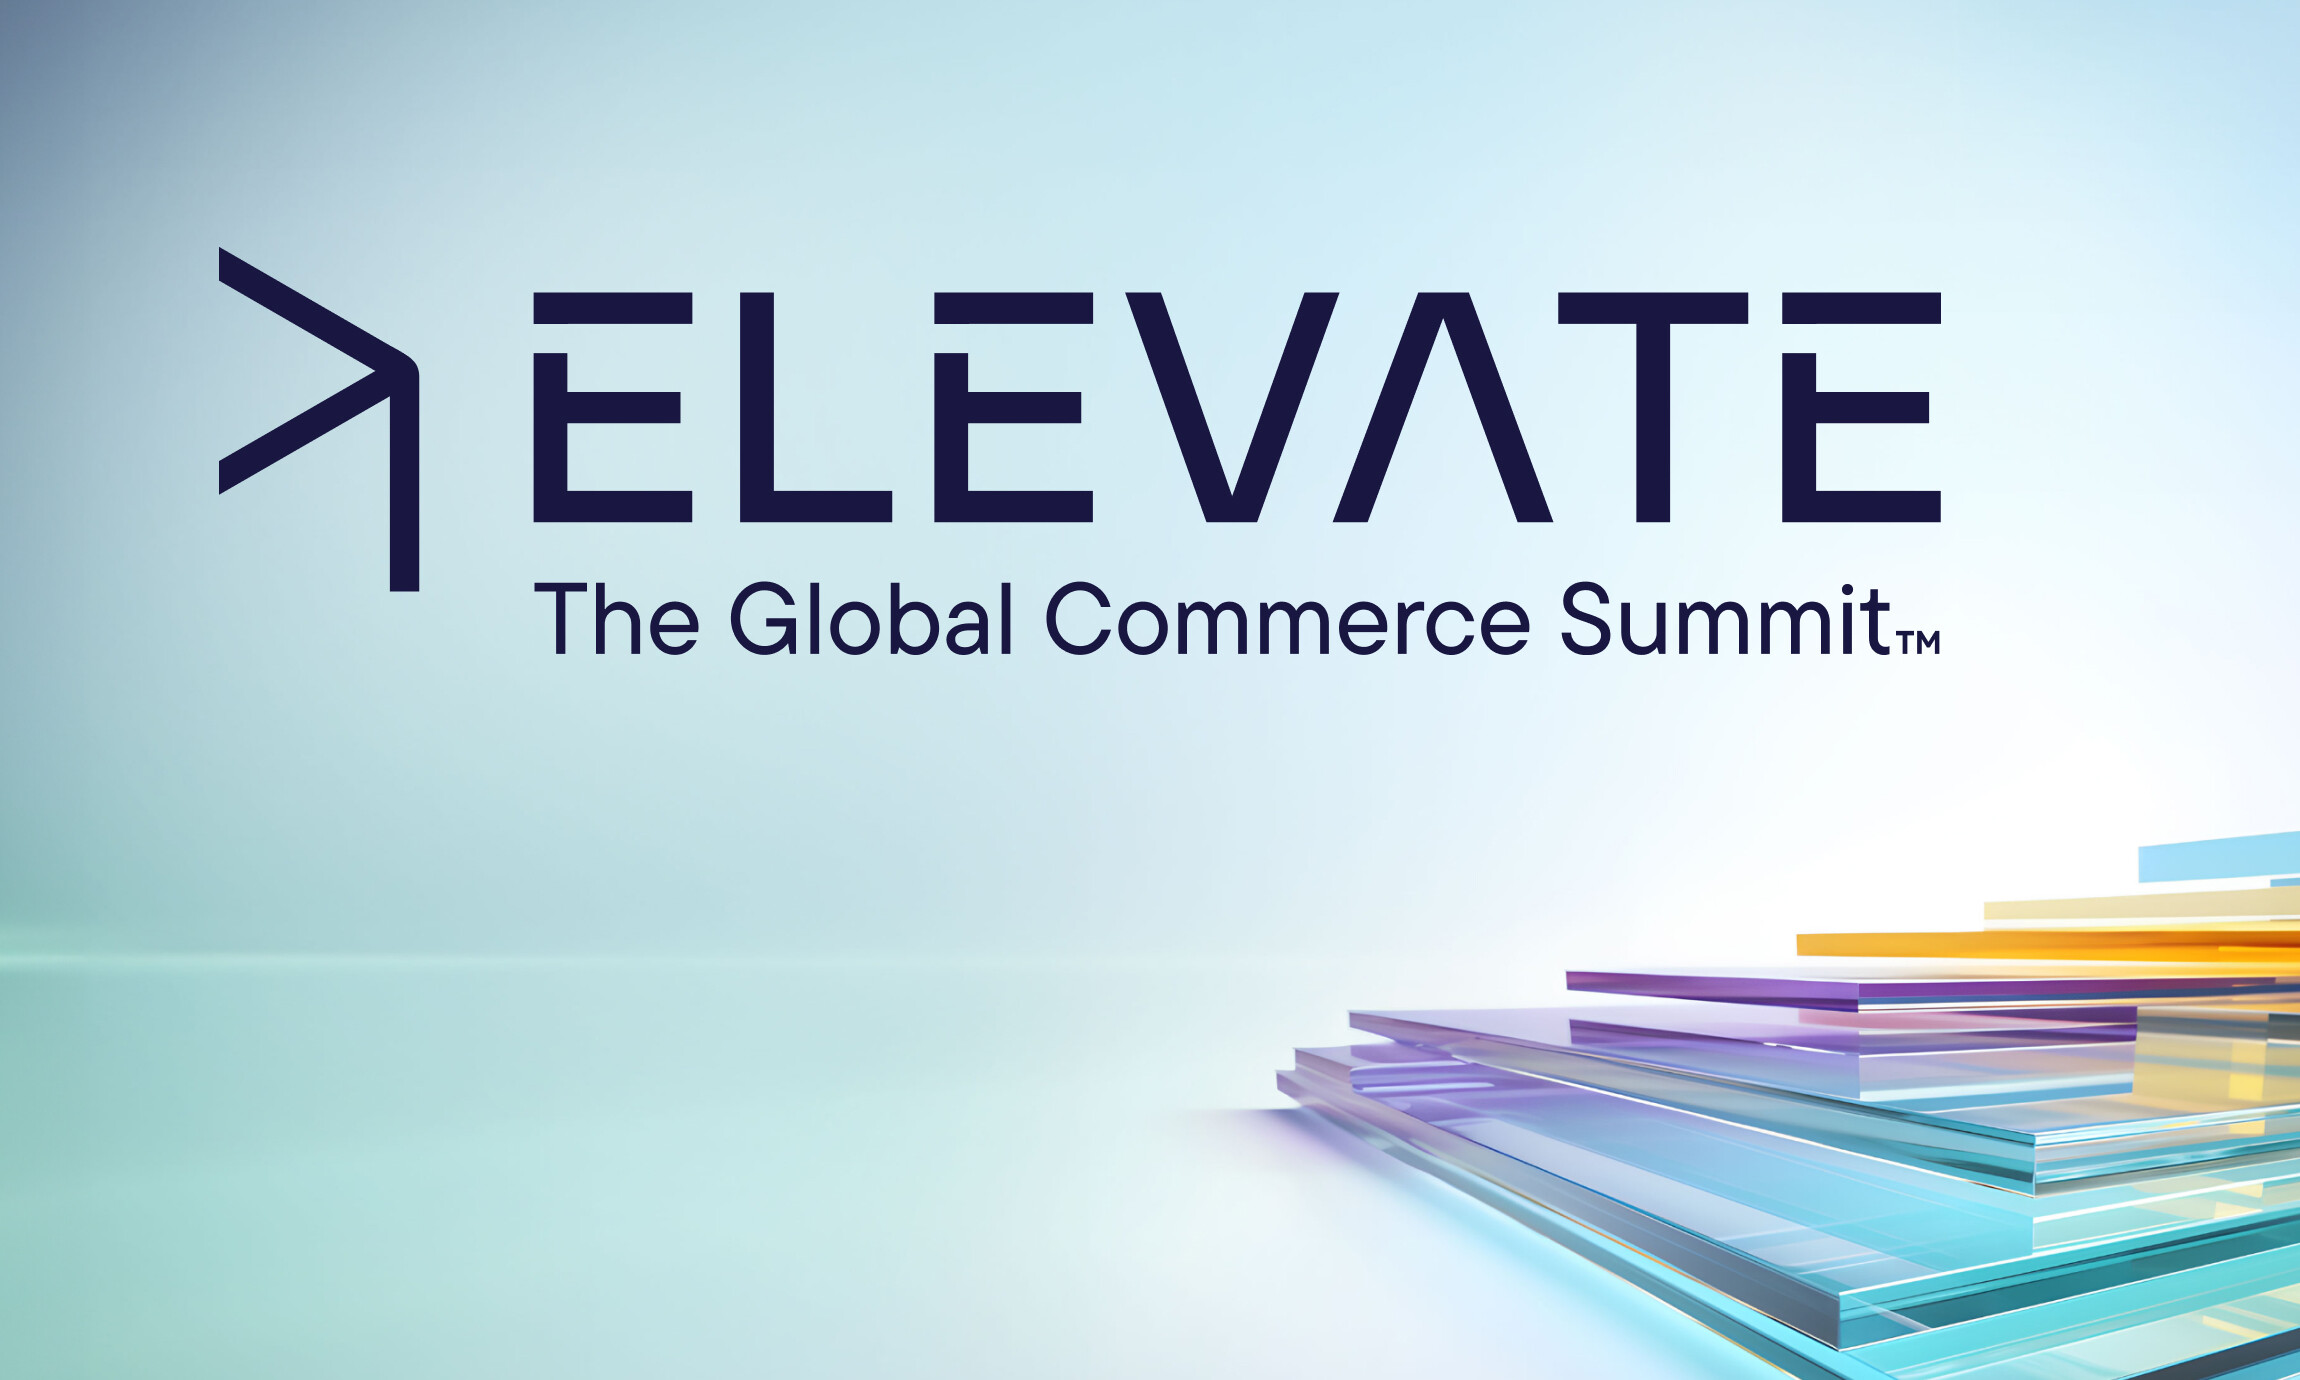 commercetools Announces Elevate - The Global Commerce Summit